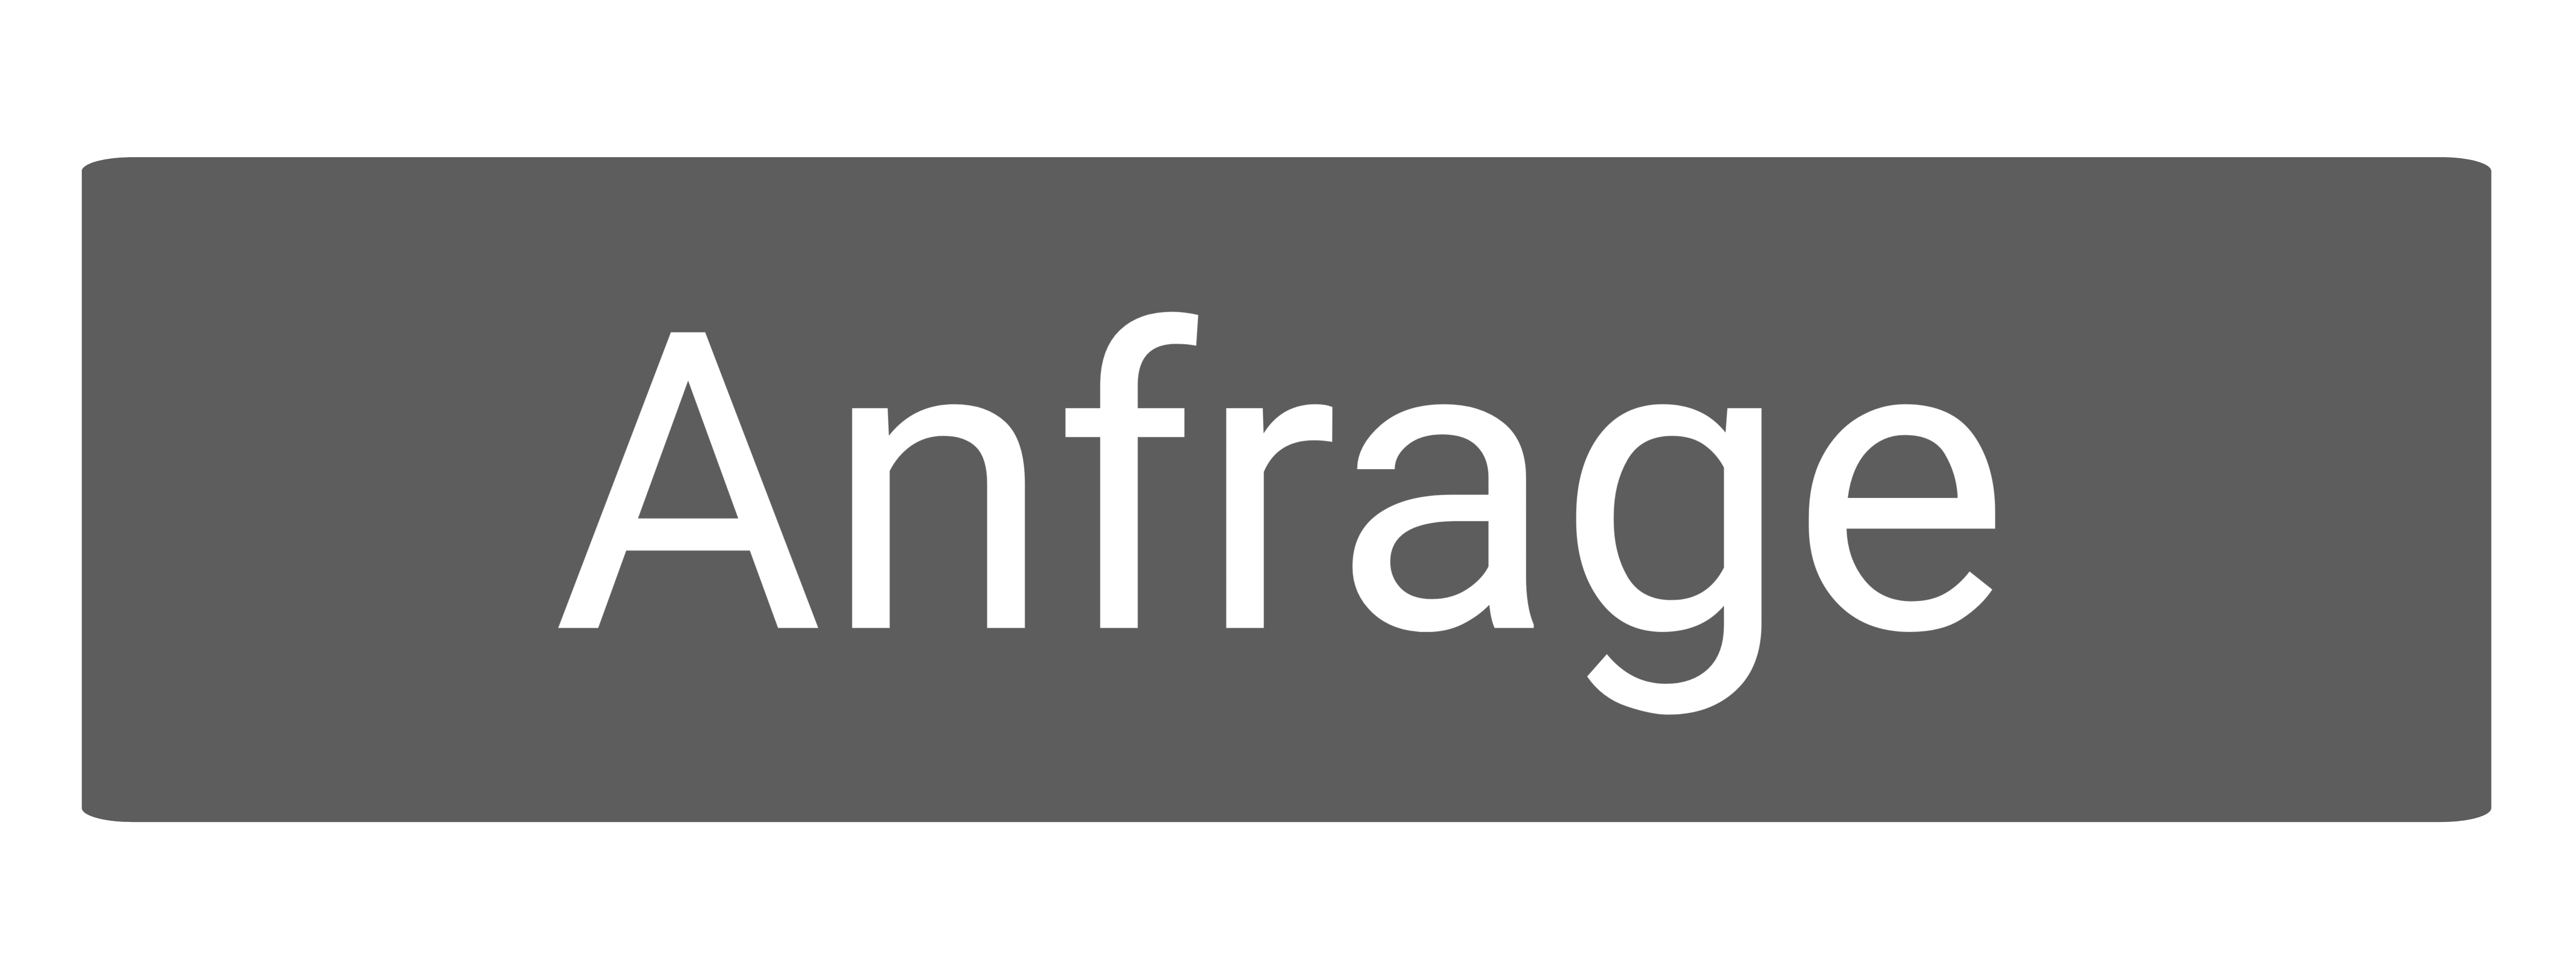 Anfrage_Button.png